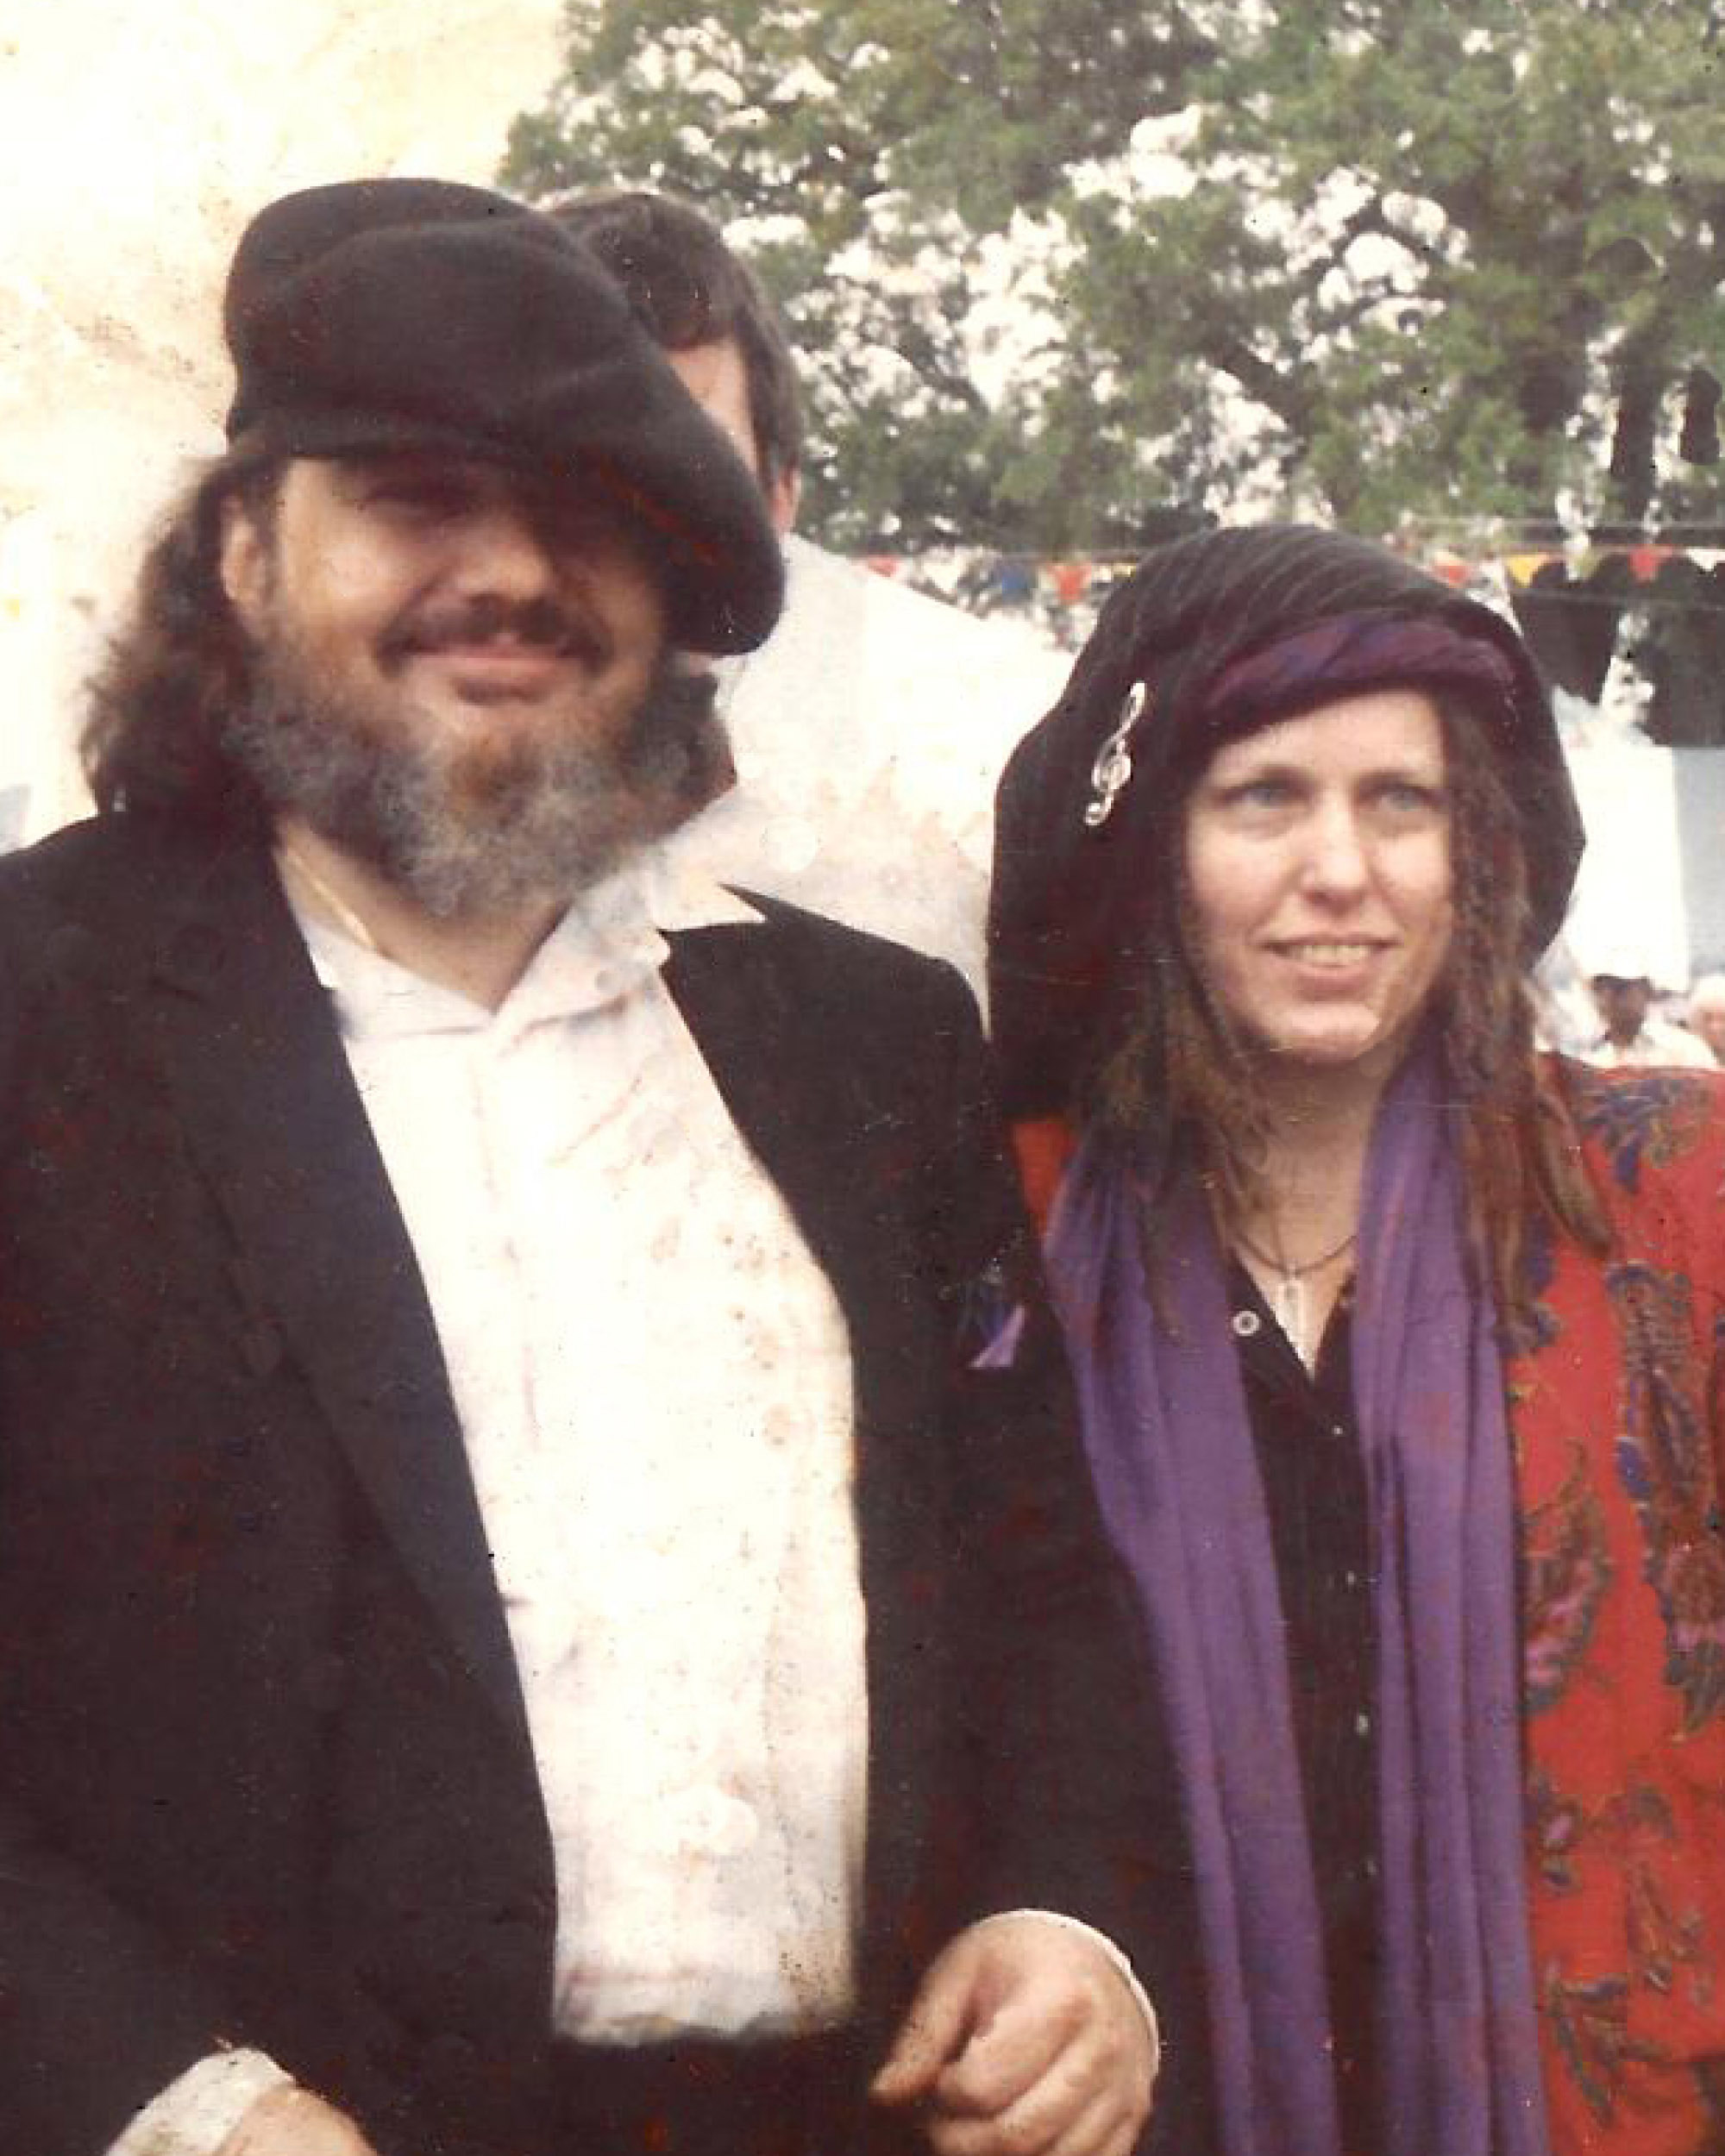 B.B. with Dr. John, a friend and New Orleans music fixture whom she travelled with and managed for close to 10 years. Image courtesy of BB St. Roman.